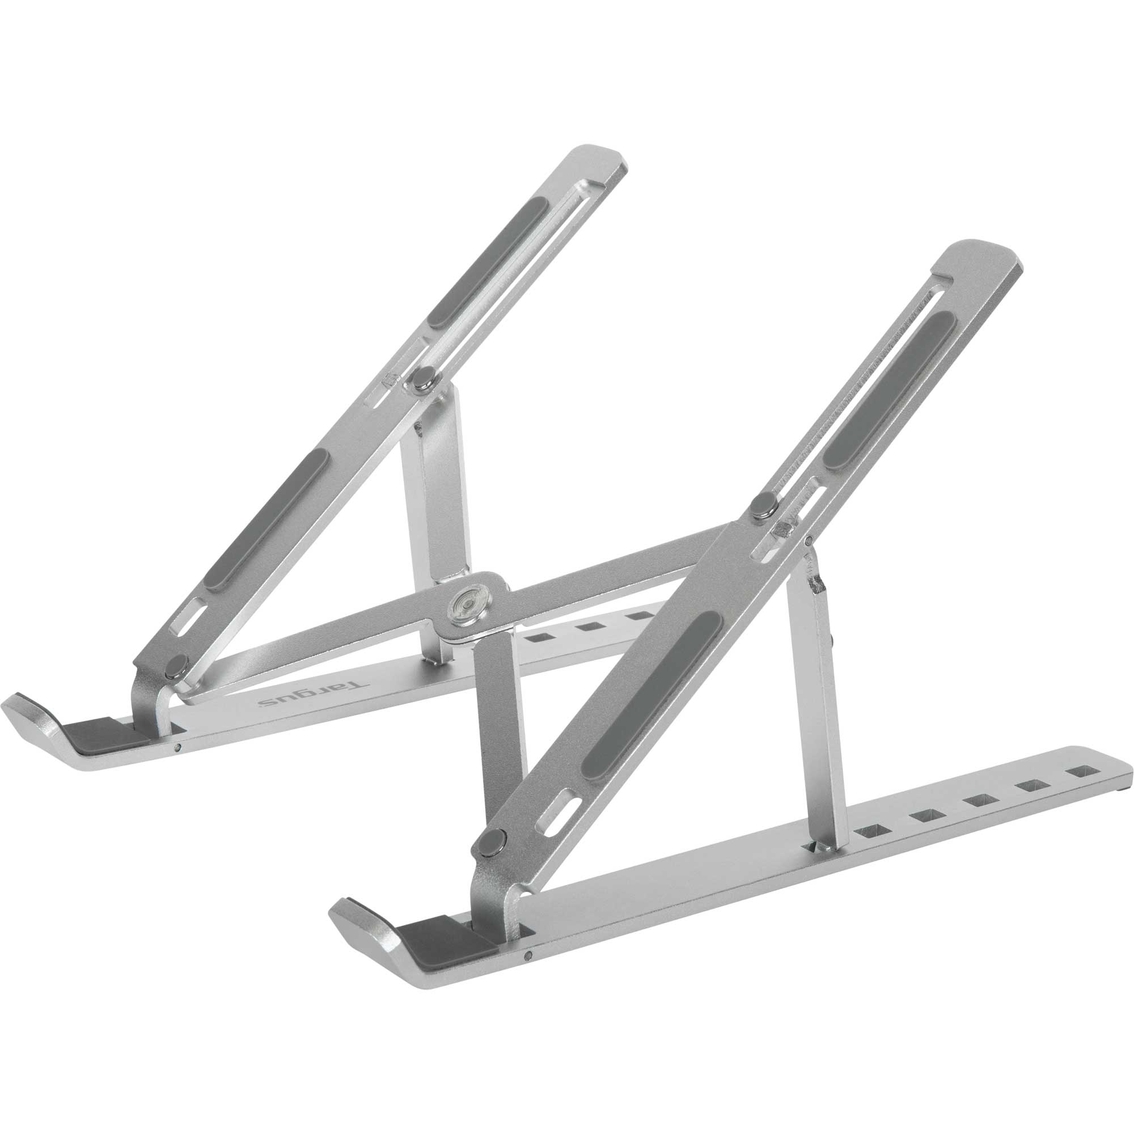 Targus Portable Ergonomic Laptop And Tablet Stand | Computer Gadgets ...